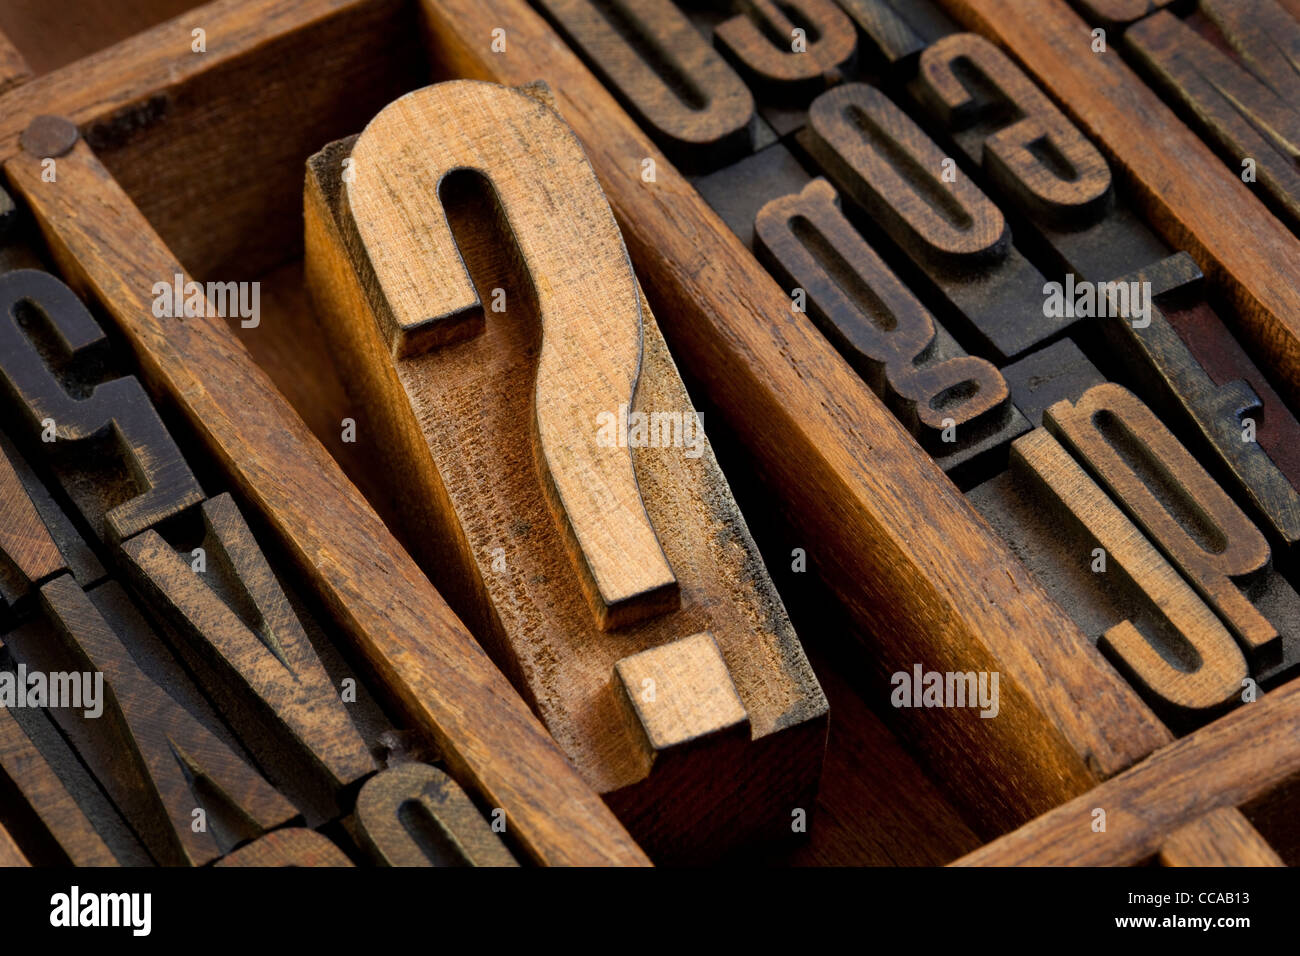 question mark - vintage wooden letterpress type block in old typesetter drawer among other letters stained by ink Stock Photo